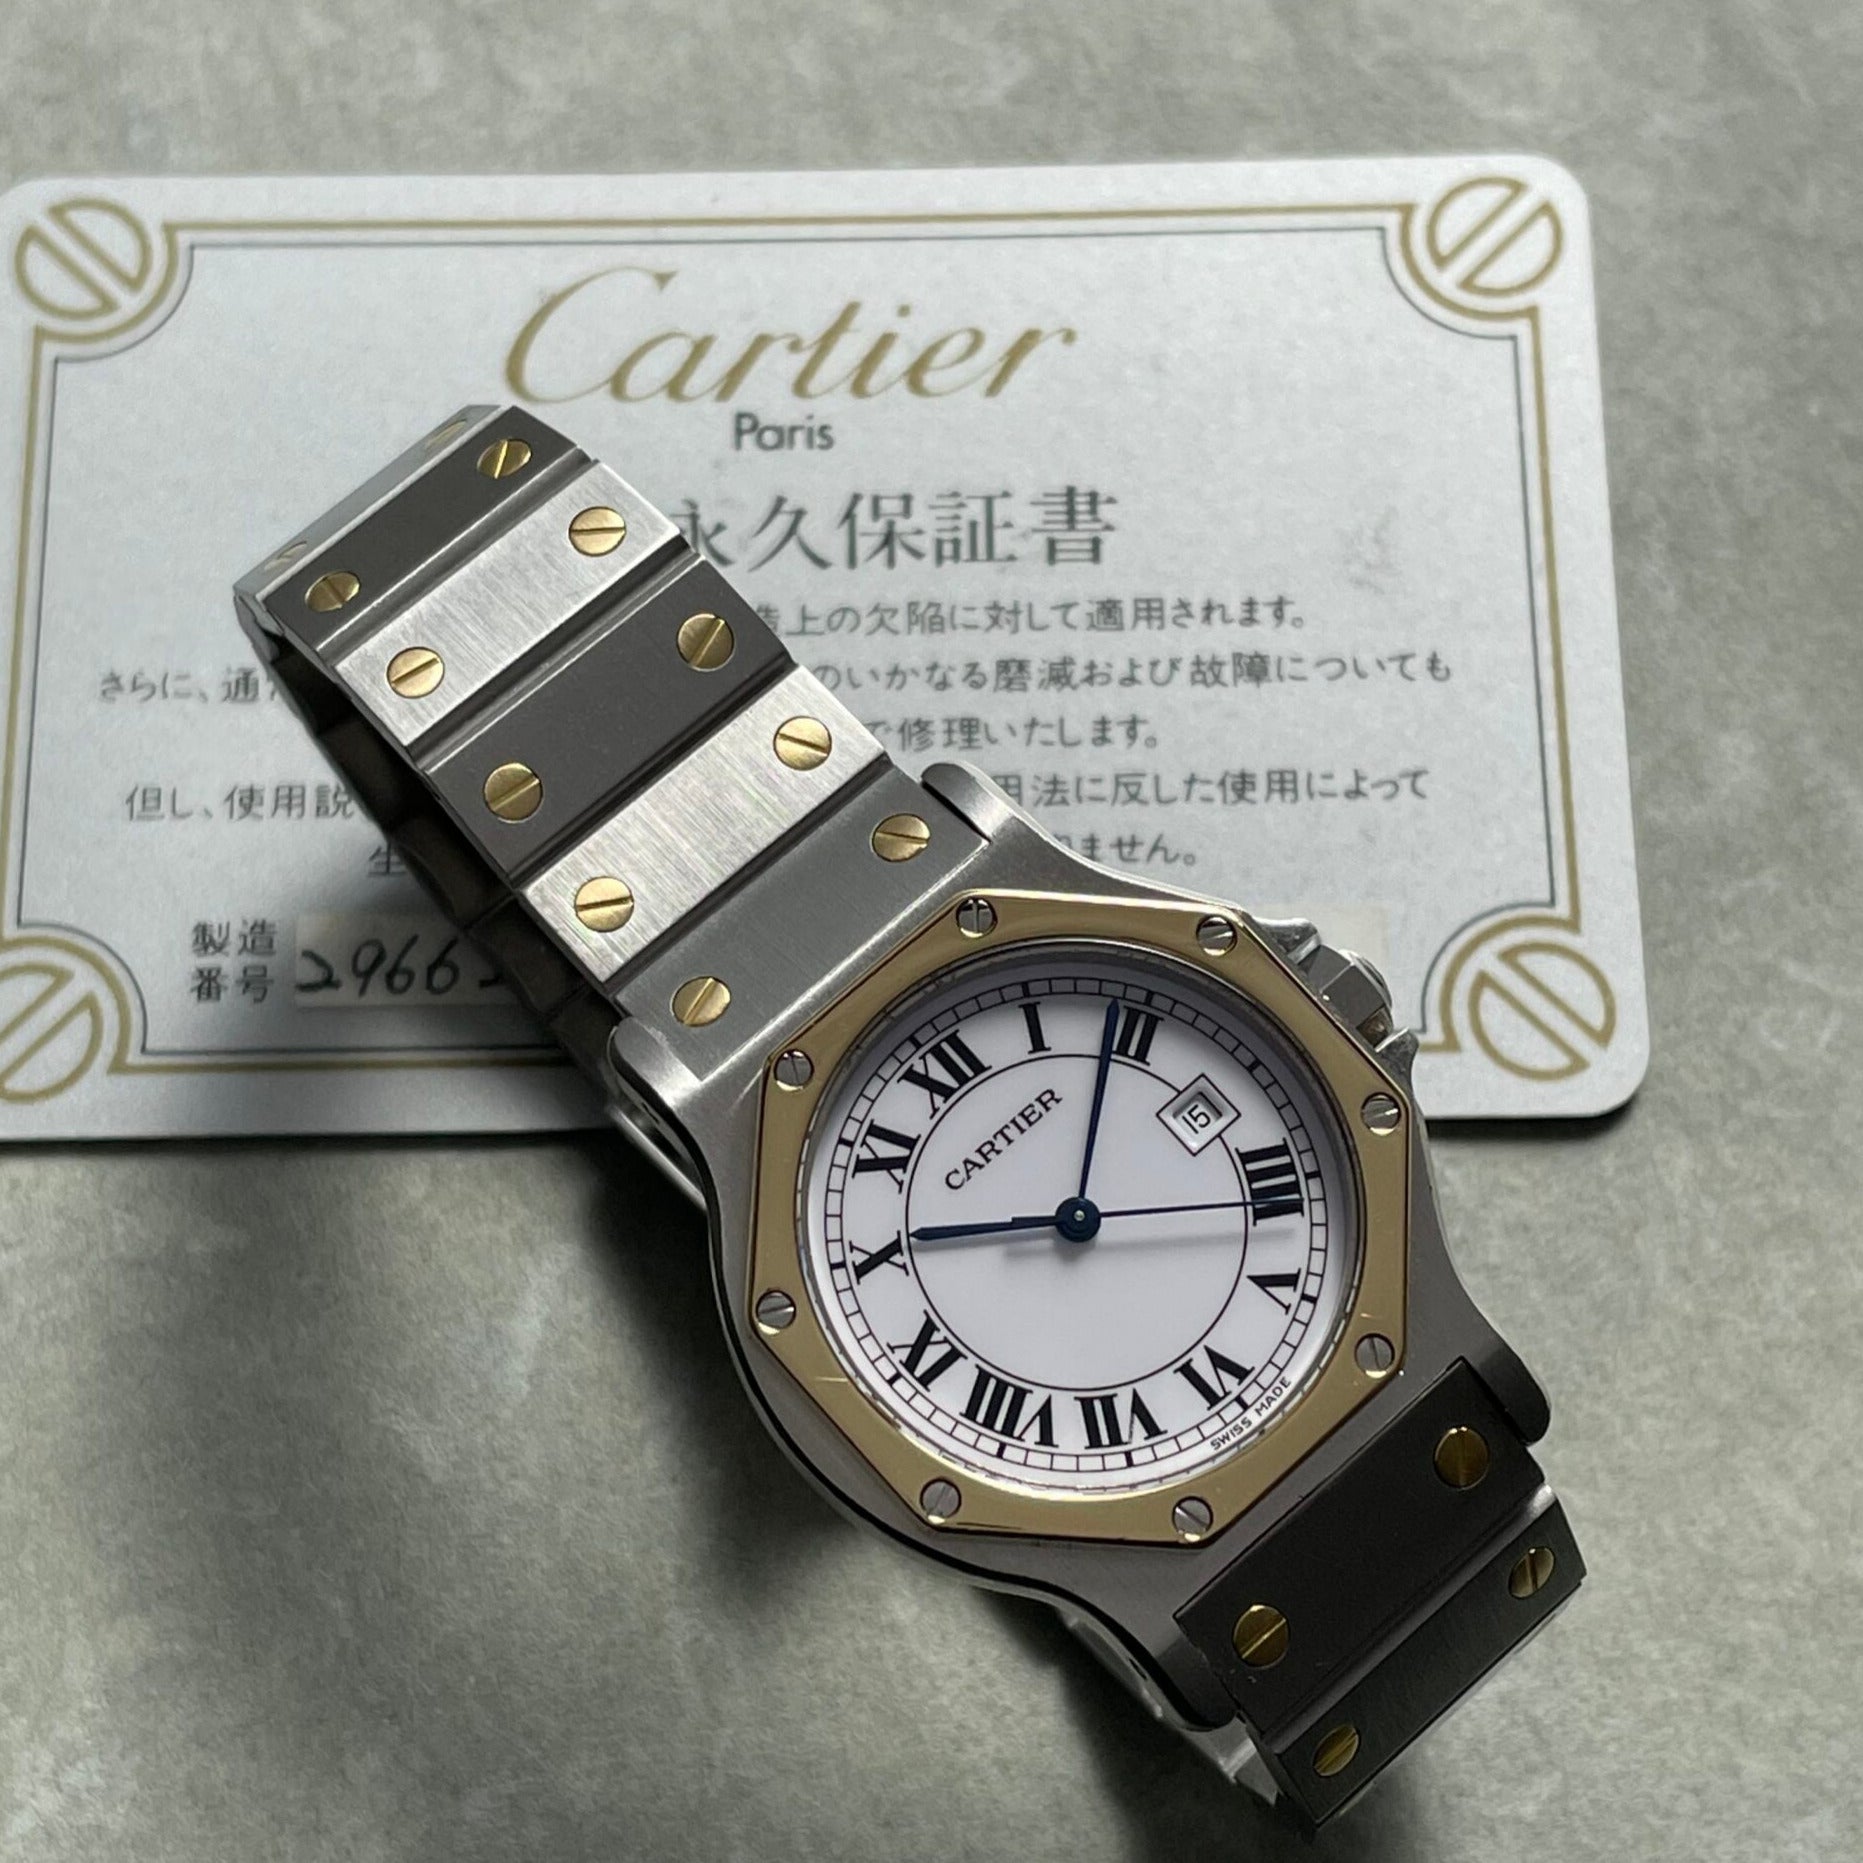 【Cartier】サントスオクタゴンLMコンビ永久保証書付き